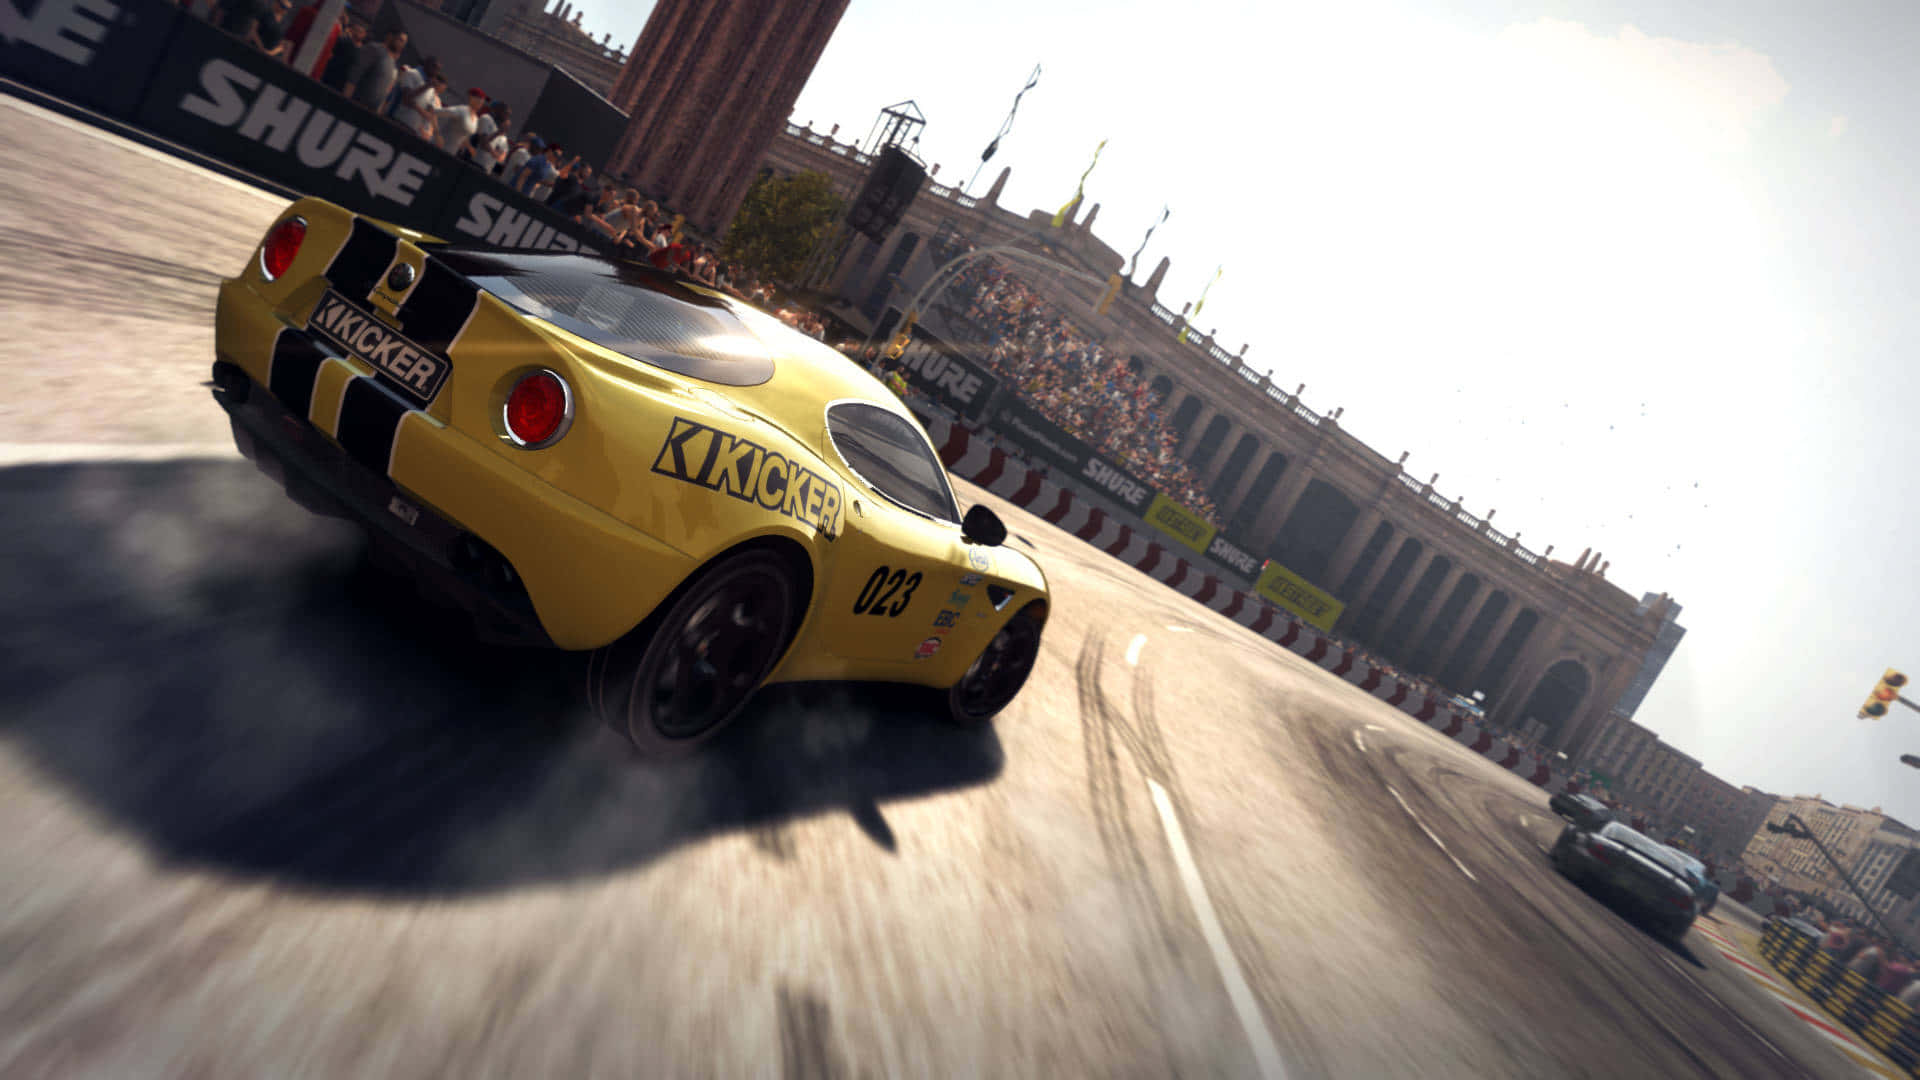 Prepare for the Ultimate Driving Challenge in HD Grid Autosport